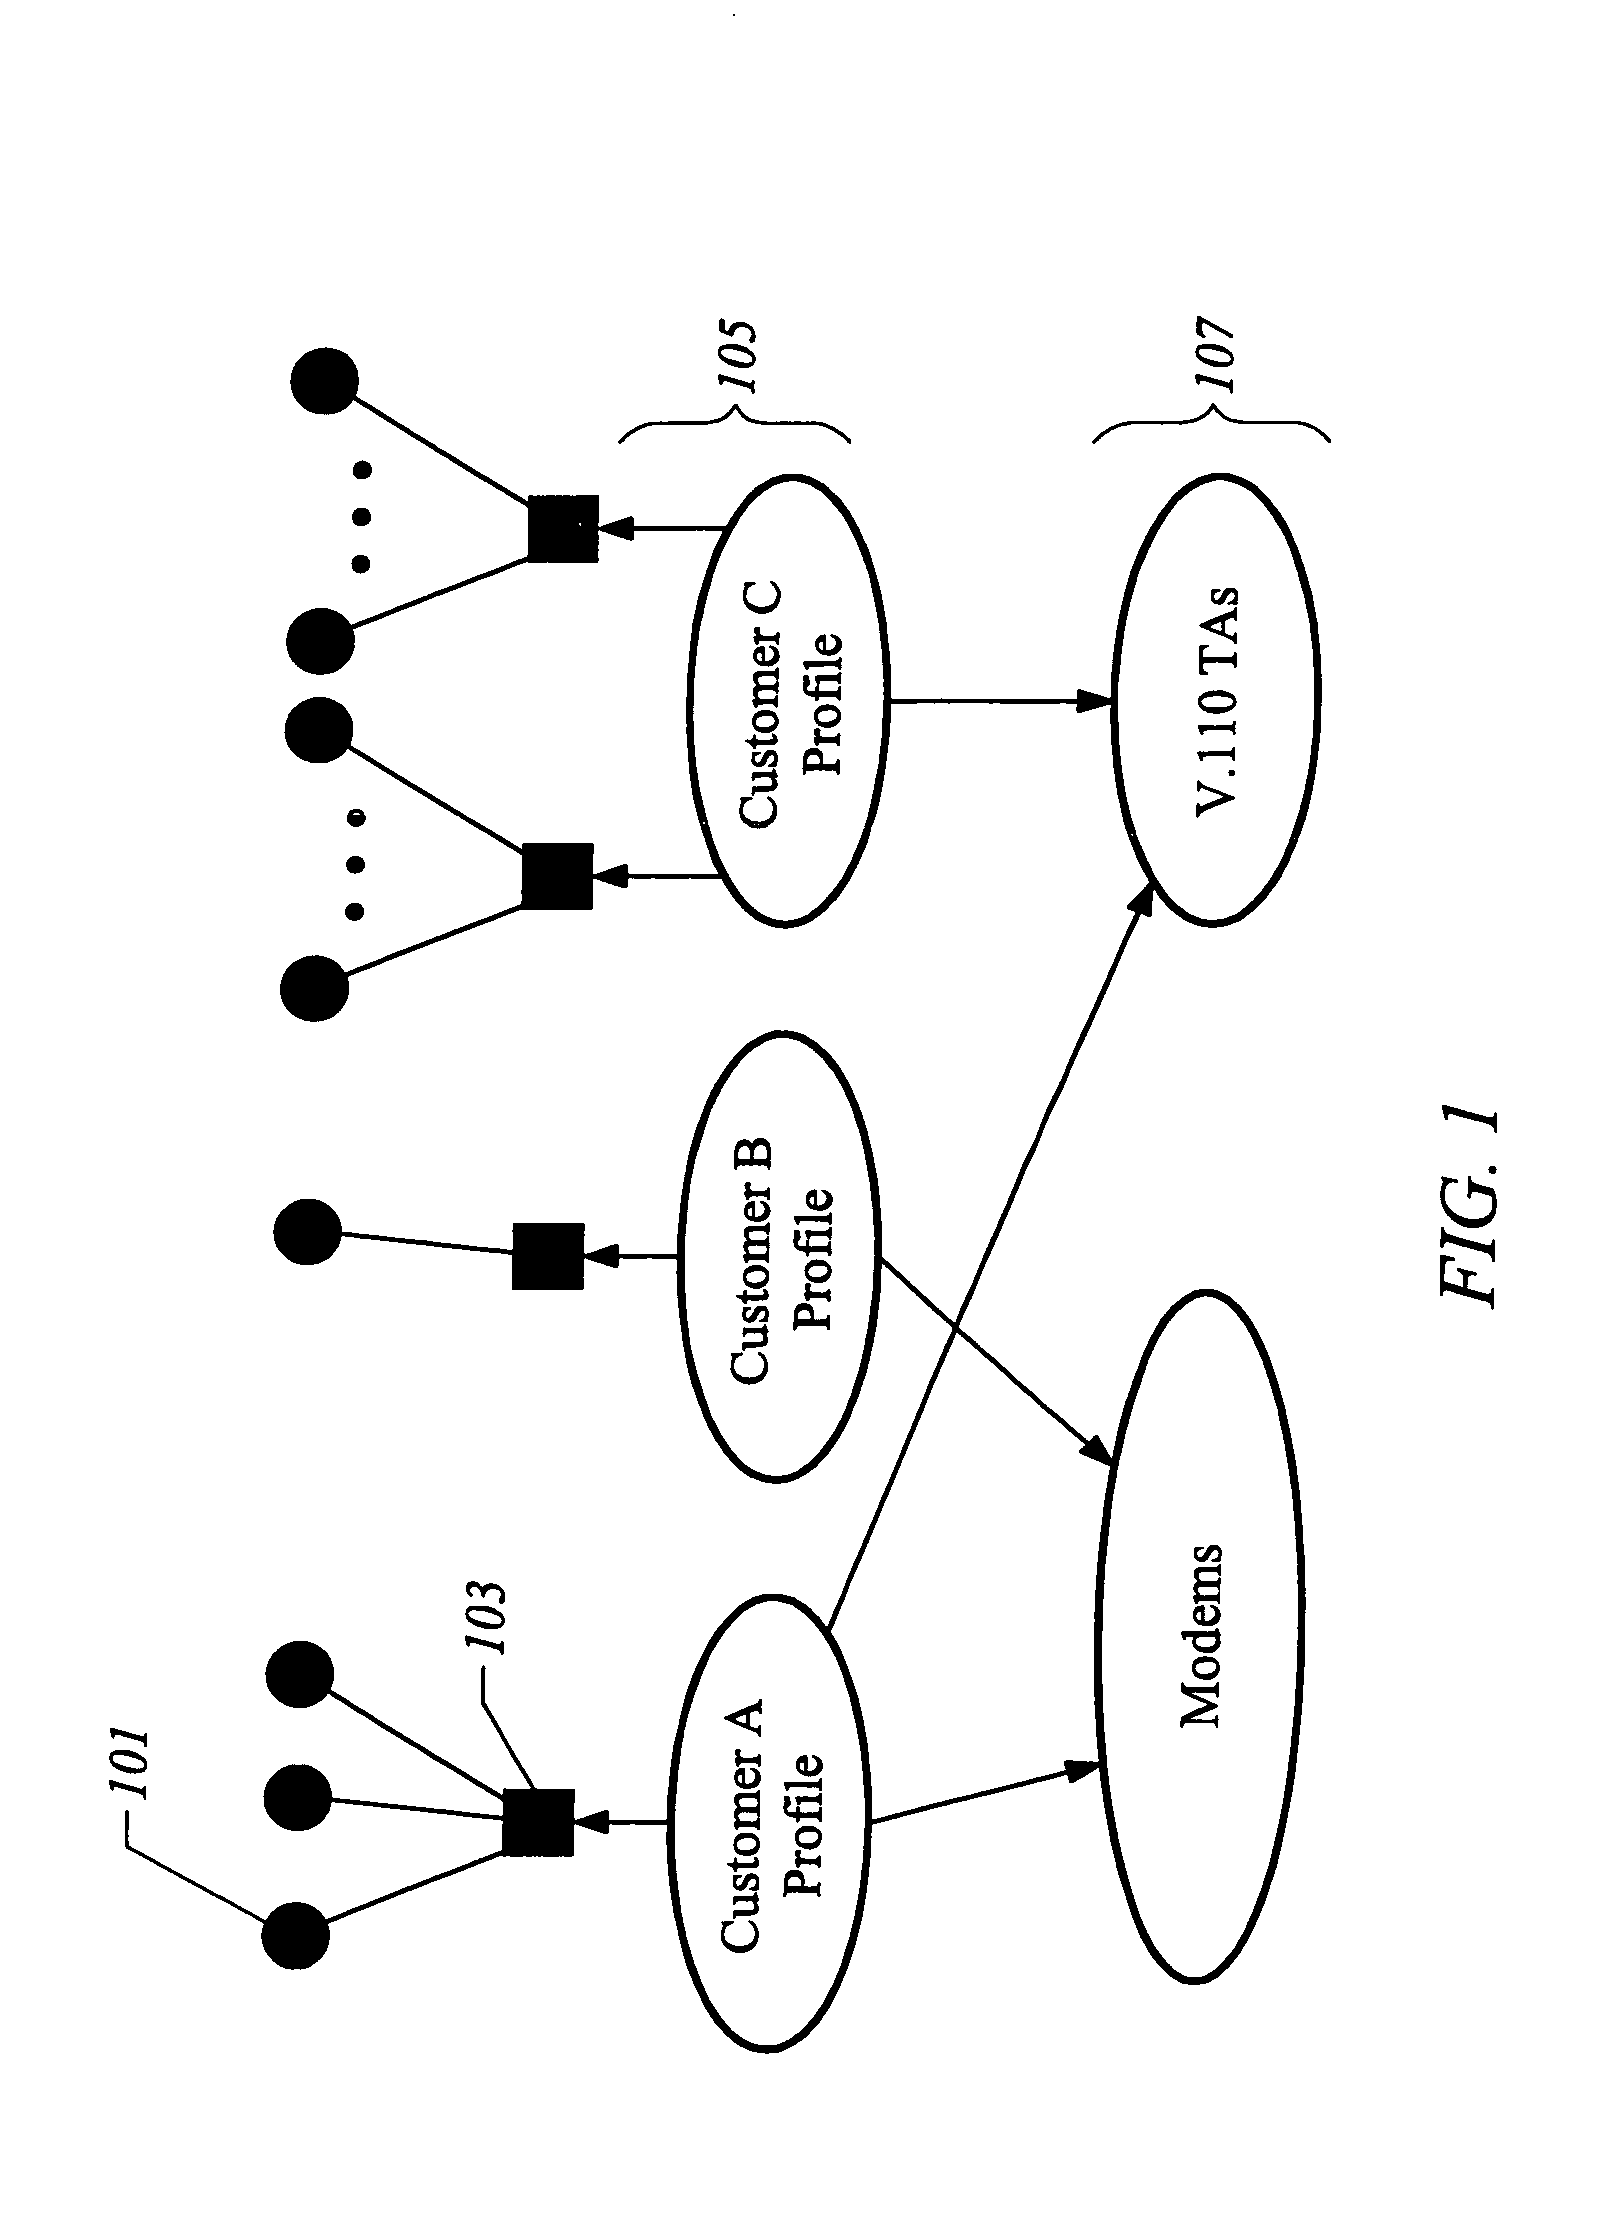 Managing access to resources and services utilizing call information